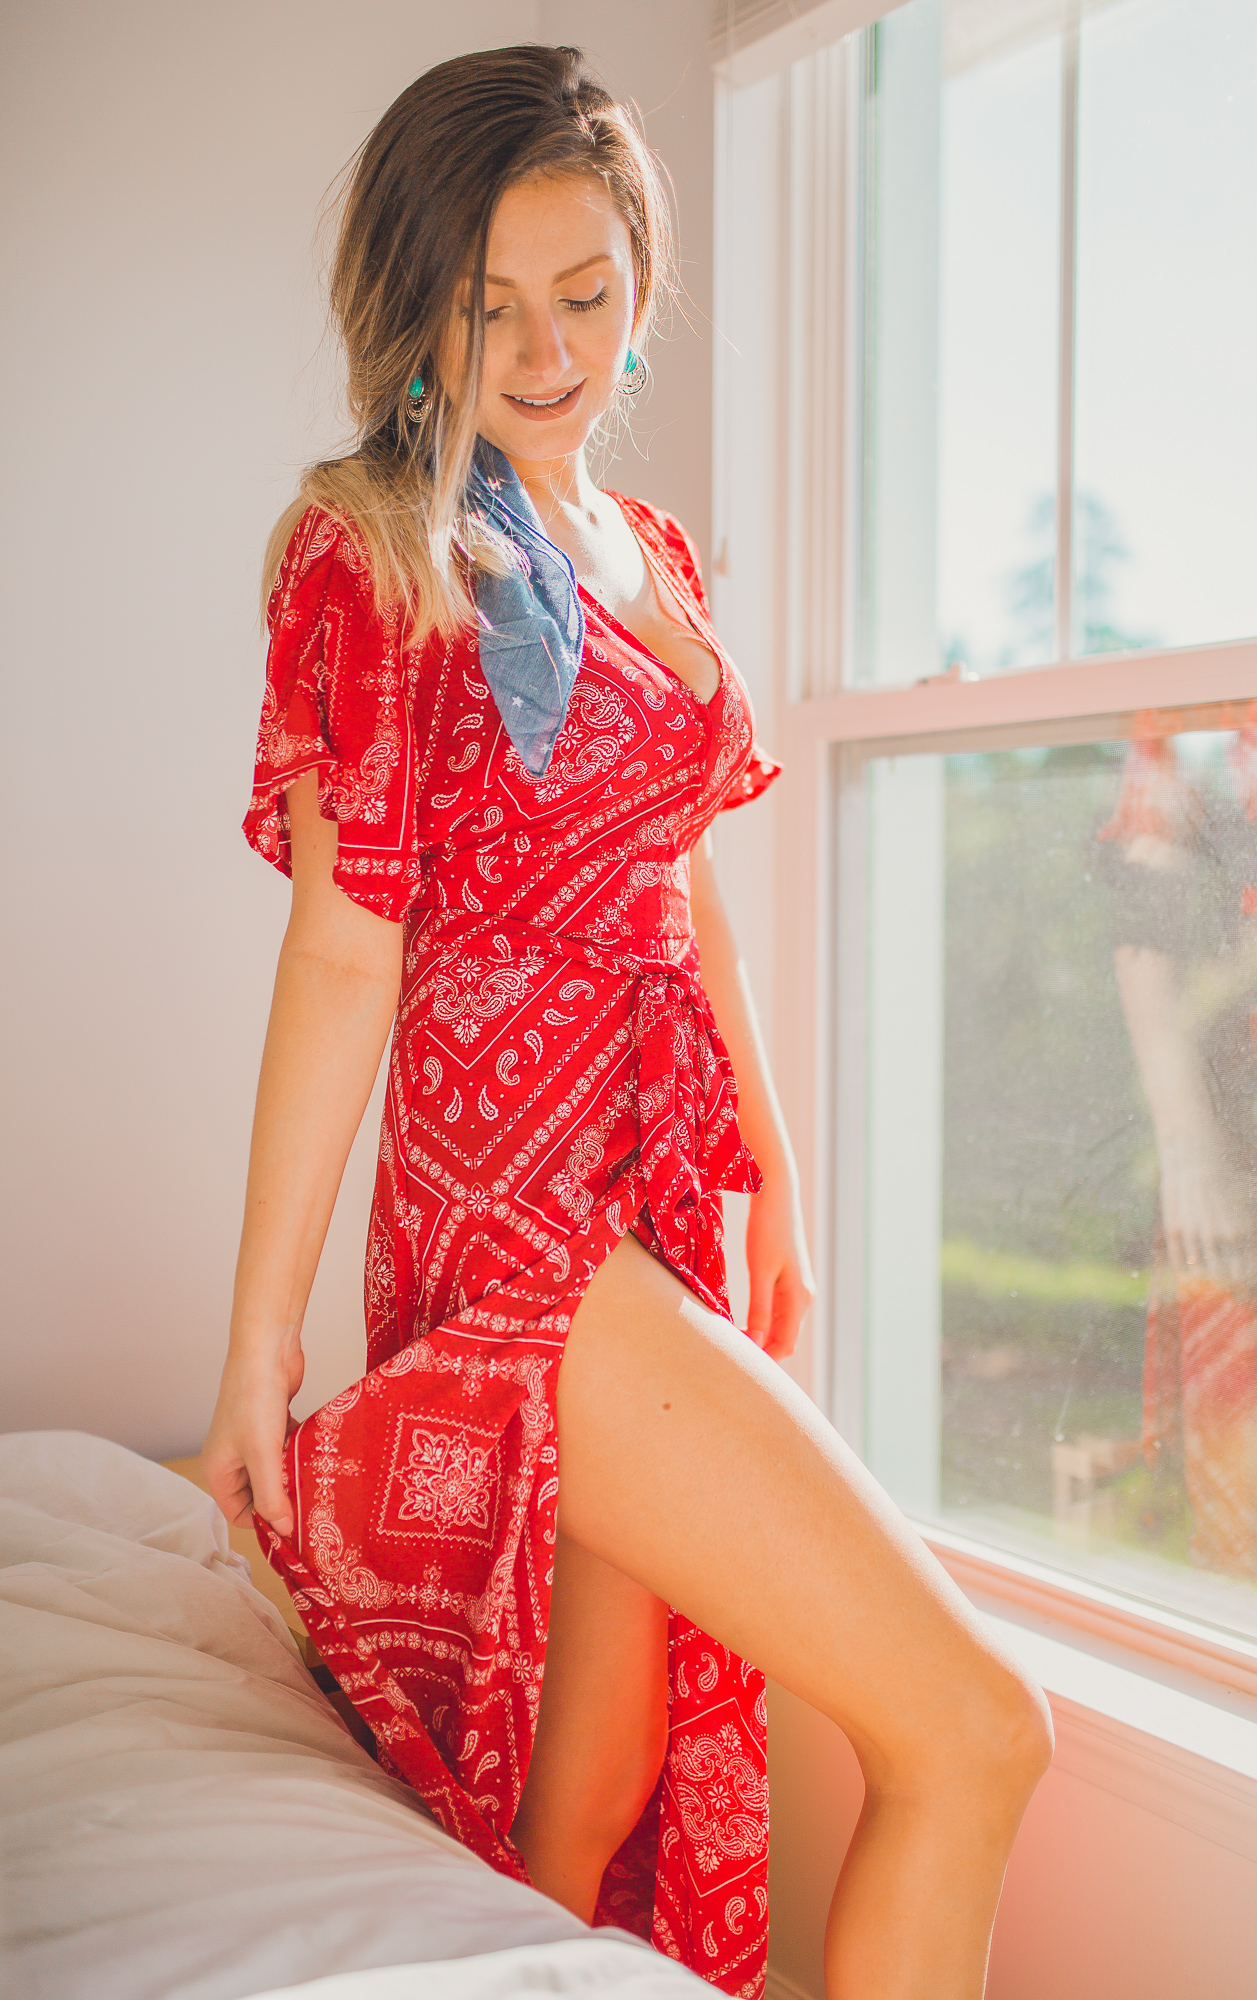 Red Bandana Maxi Dress from Forever21. Styled by Fashion and lifestyle blogger Jessica Linn.